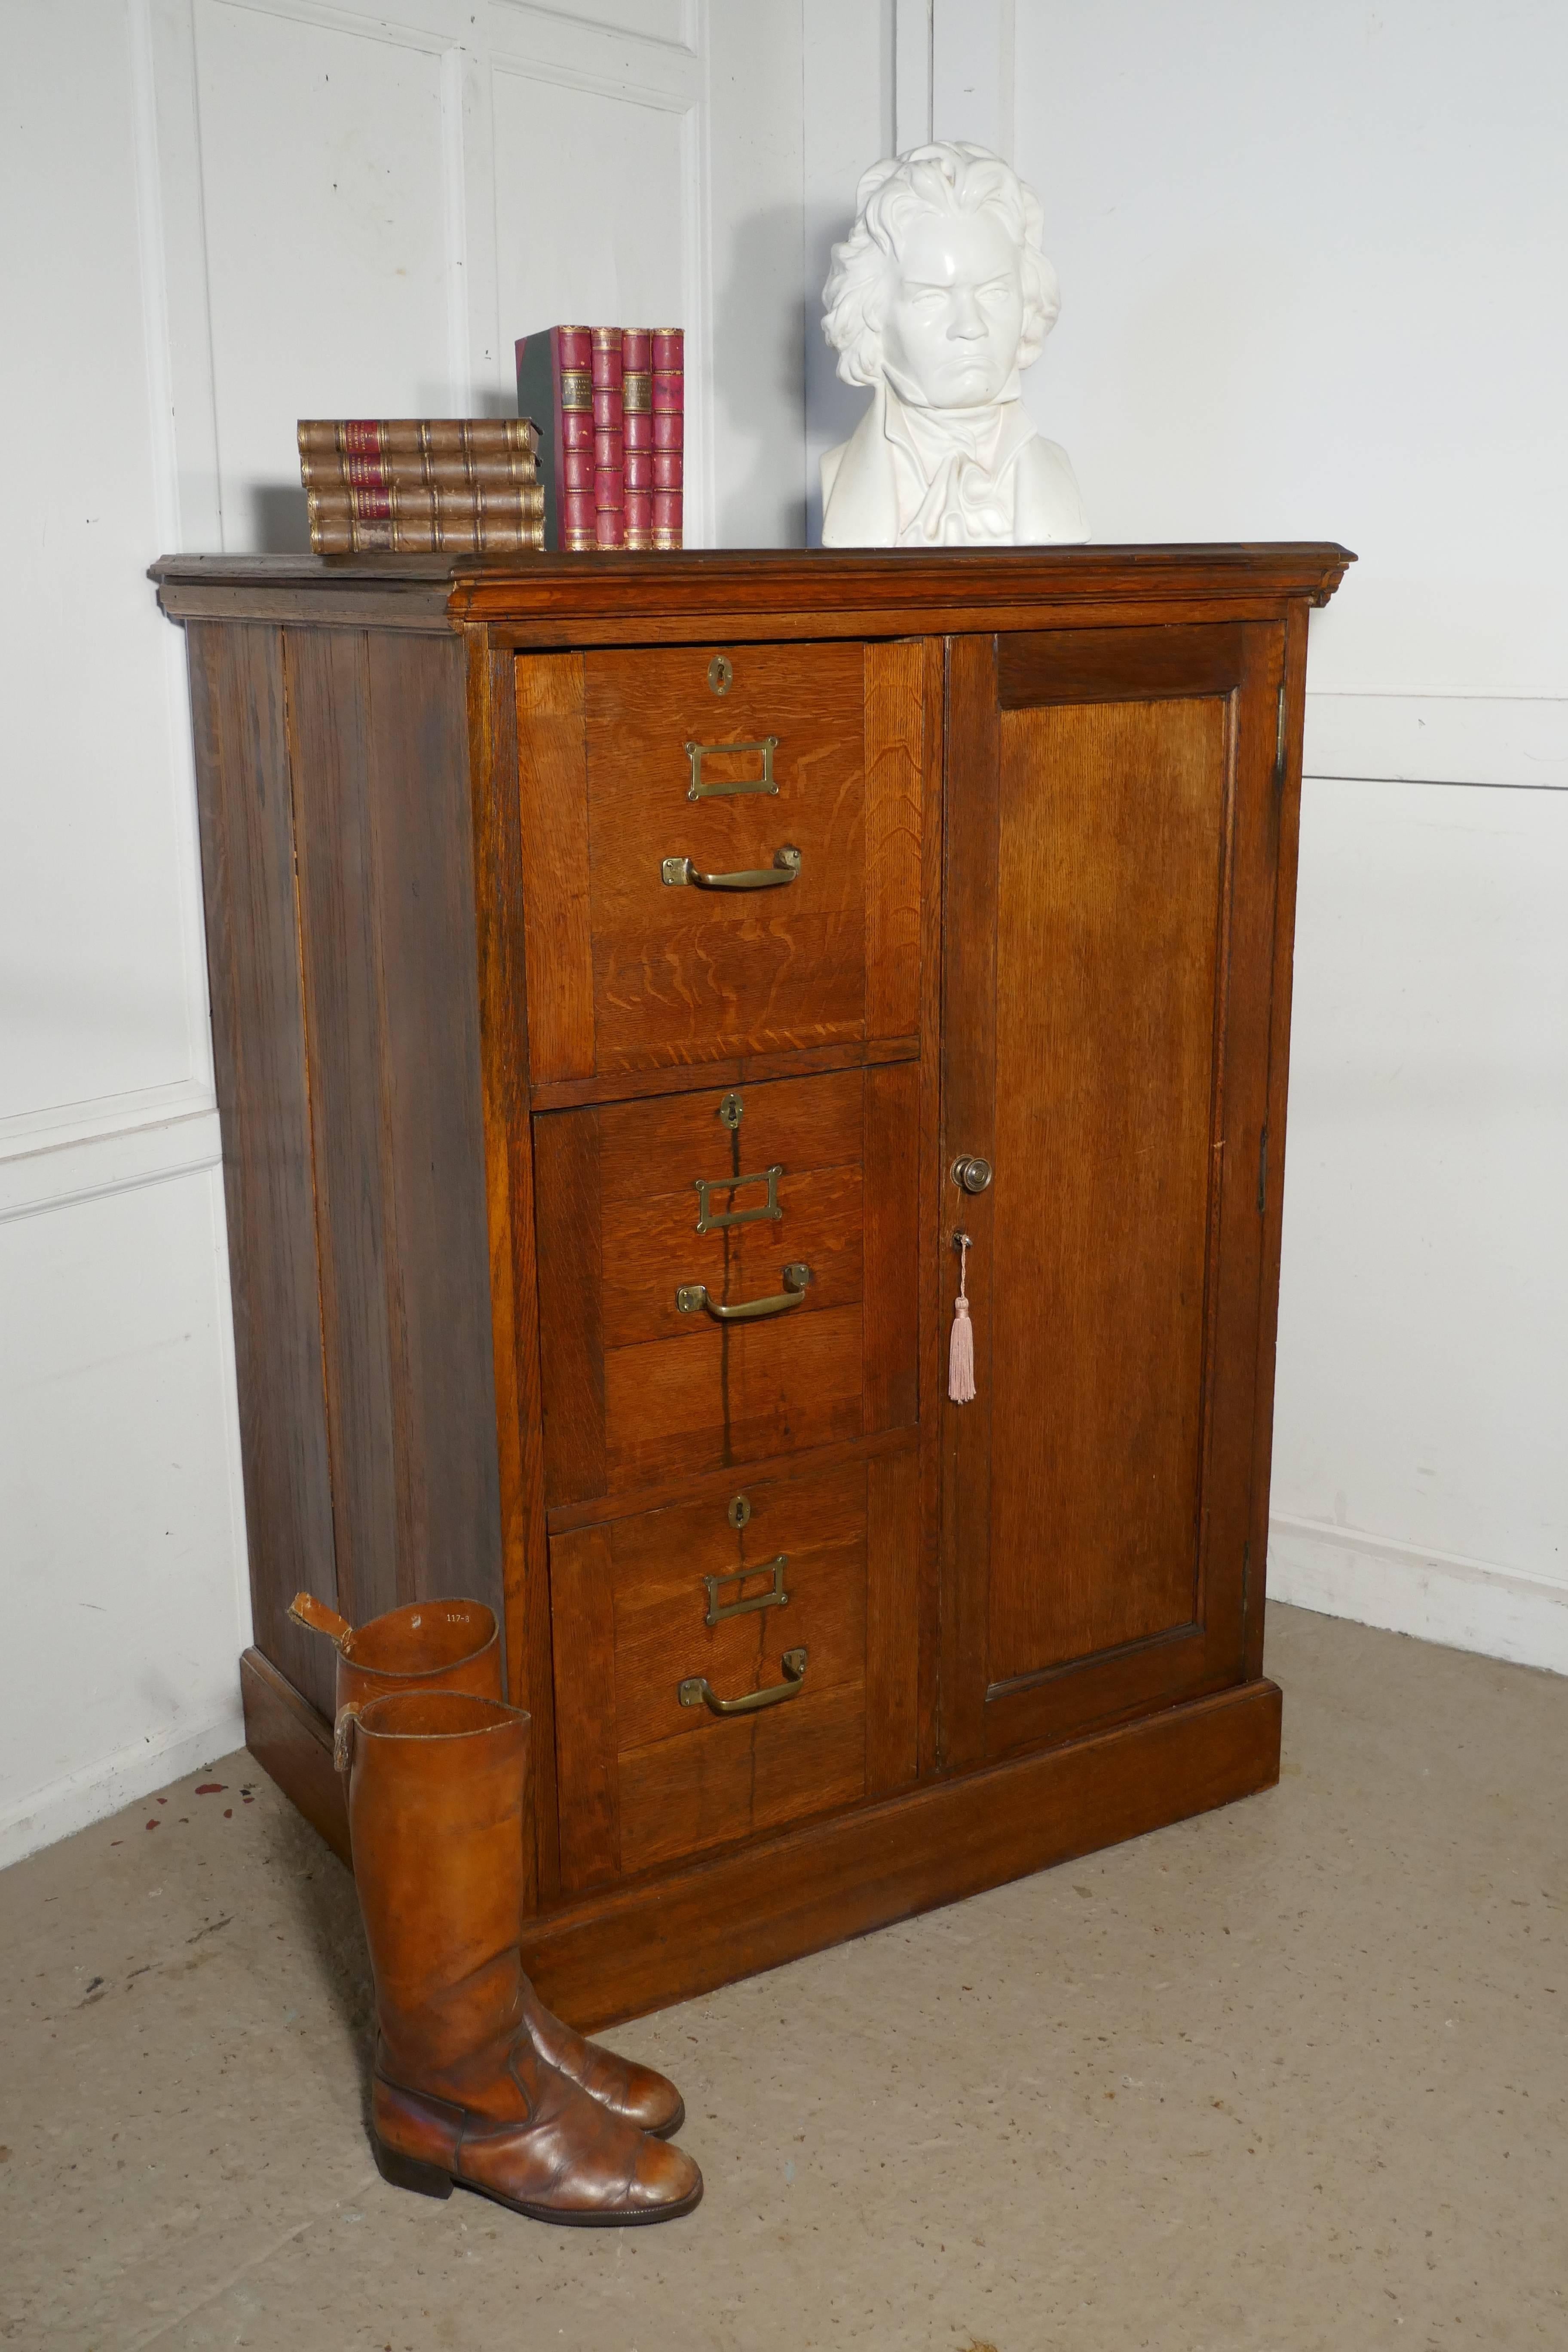 Large Edwardian oak filing cabinet, office cupboard.

This is an absolute must for every home office or study, the cupboard will hold it all. There are three large filing drawers on one side and a panelled door on the other concealing a shelved